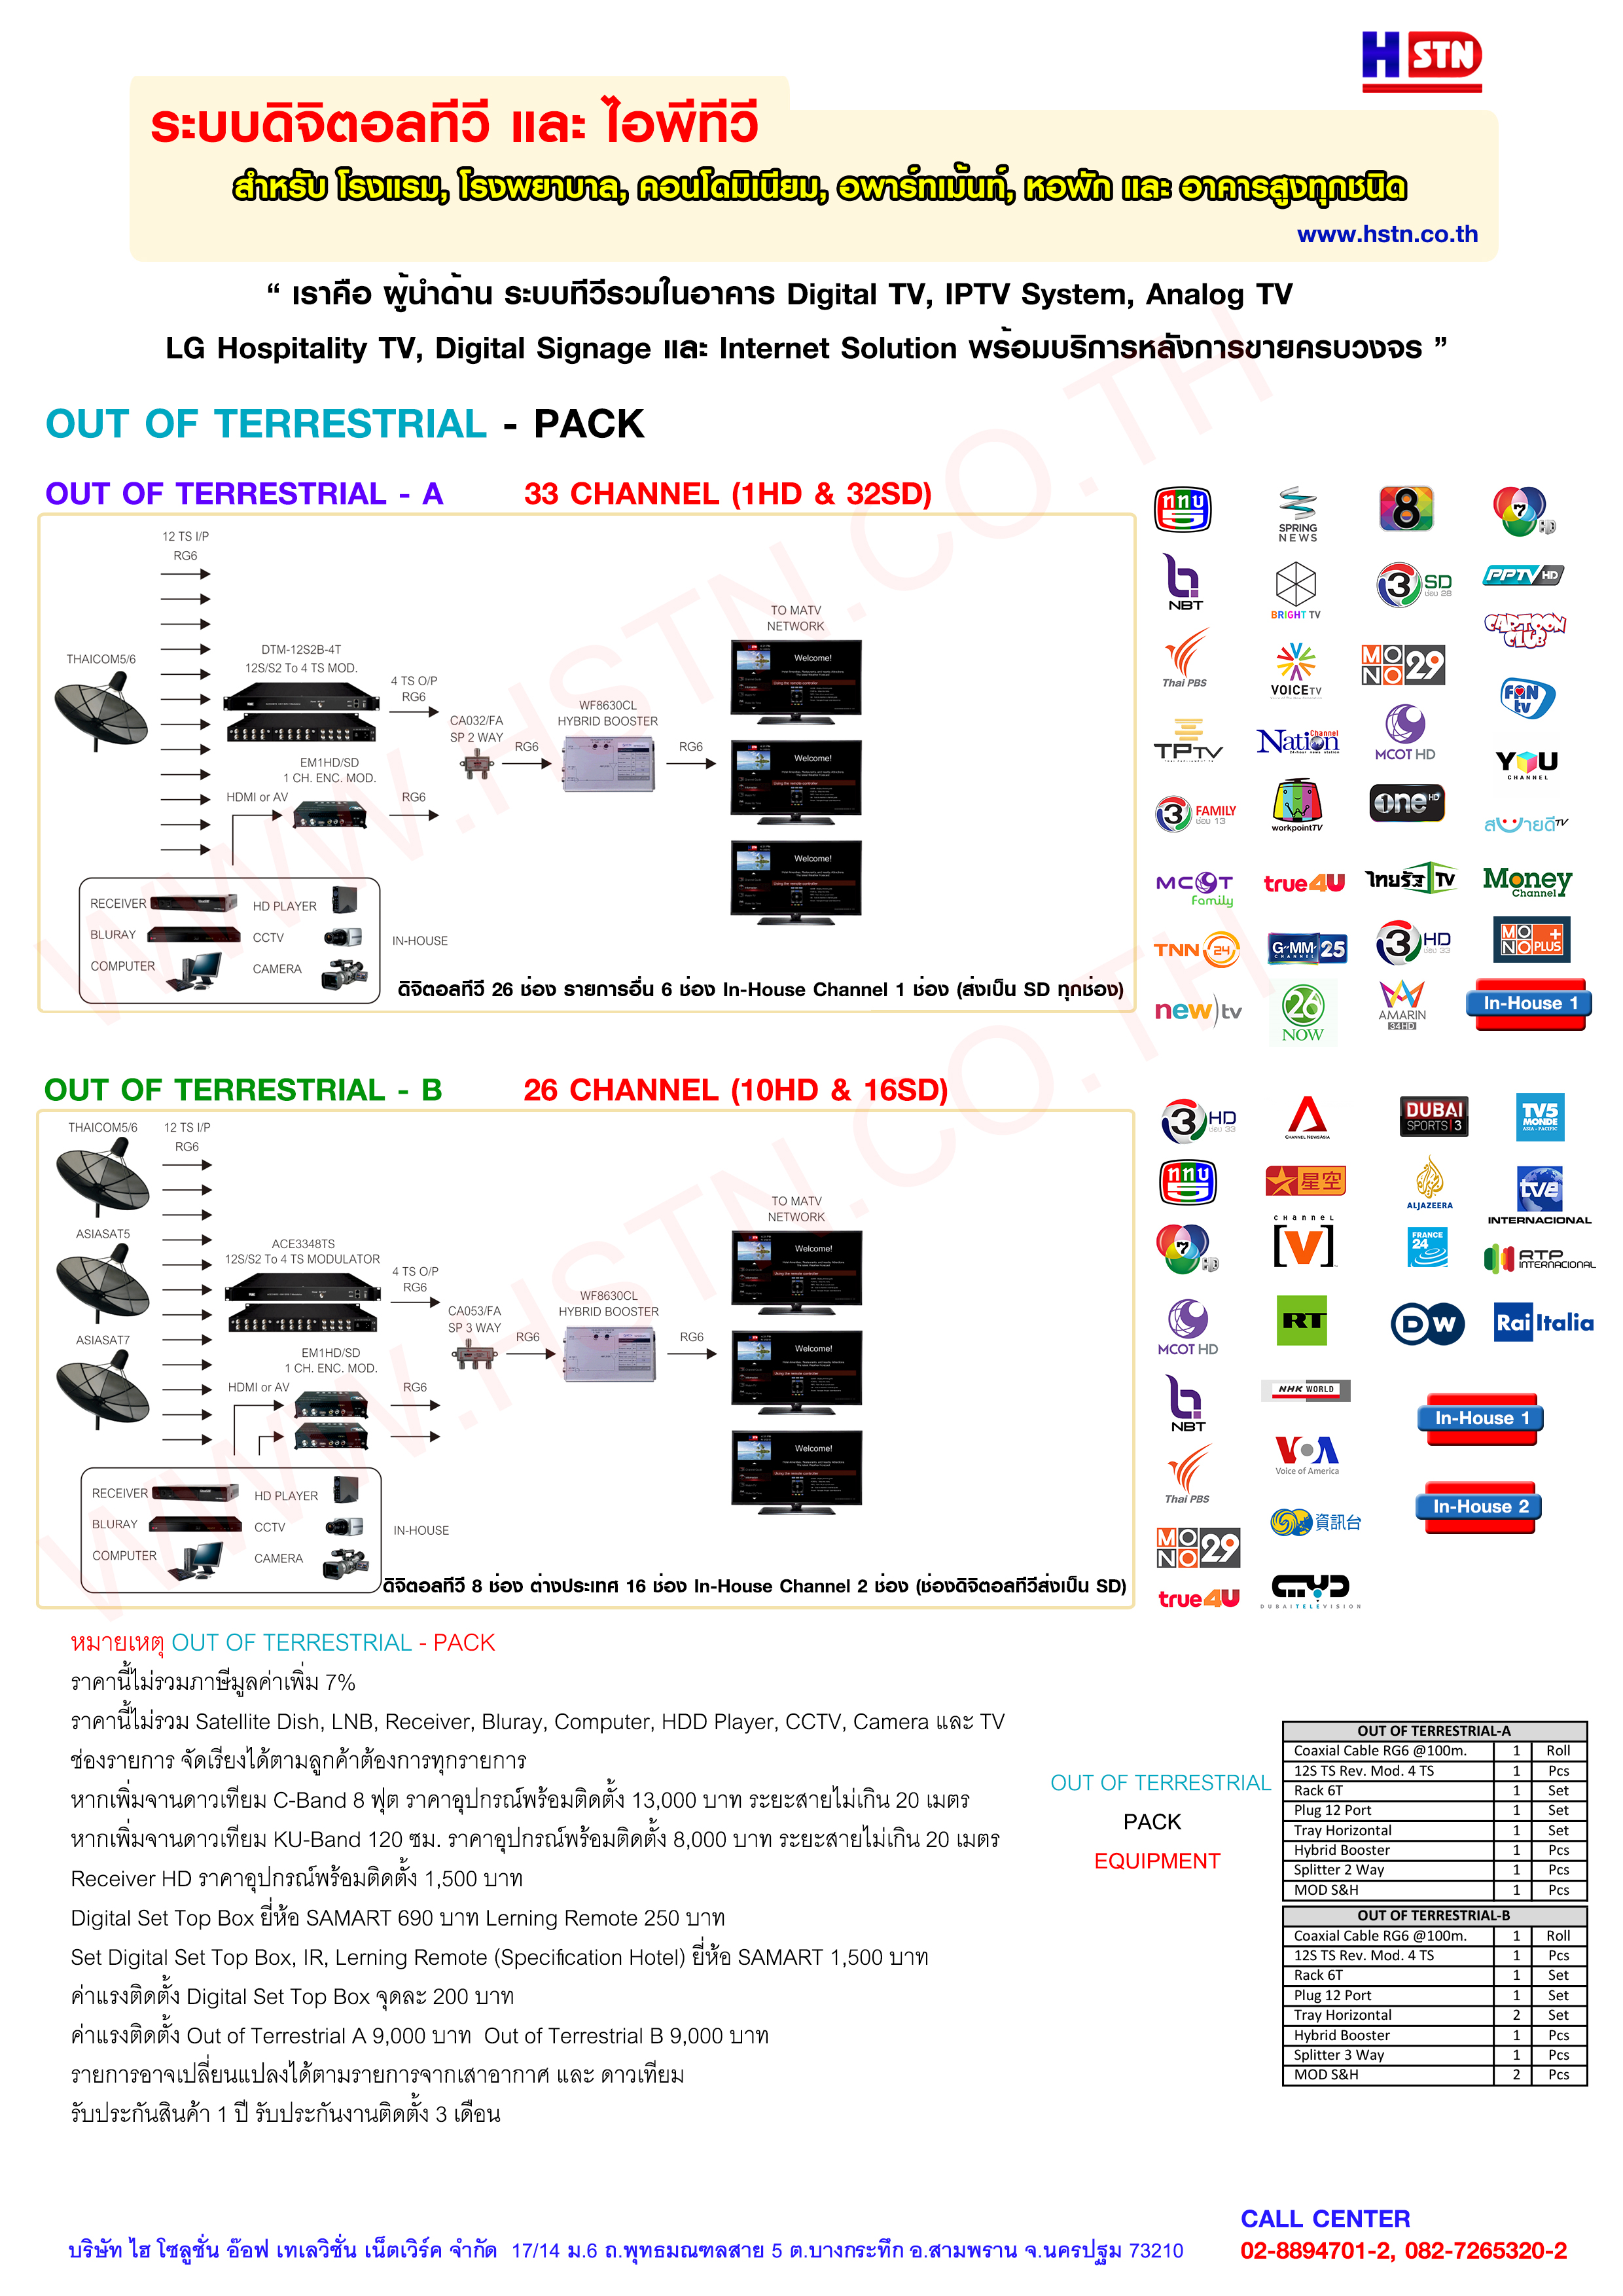 Digital TV Solution Out of Terrestrial by HSTN